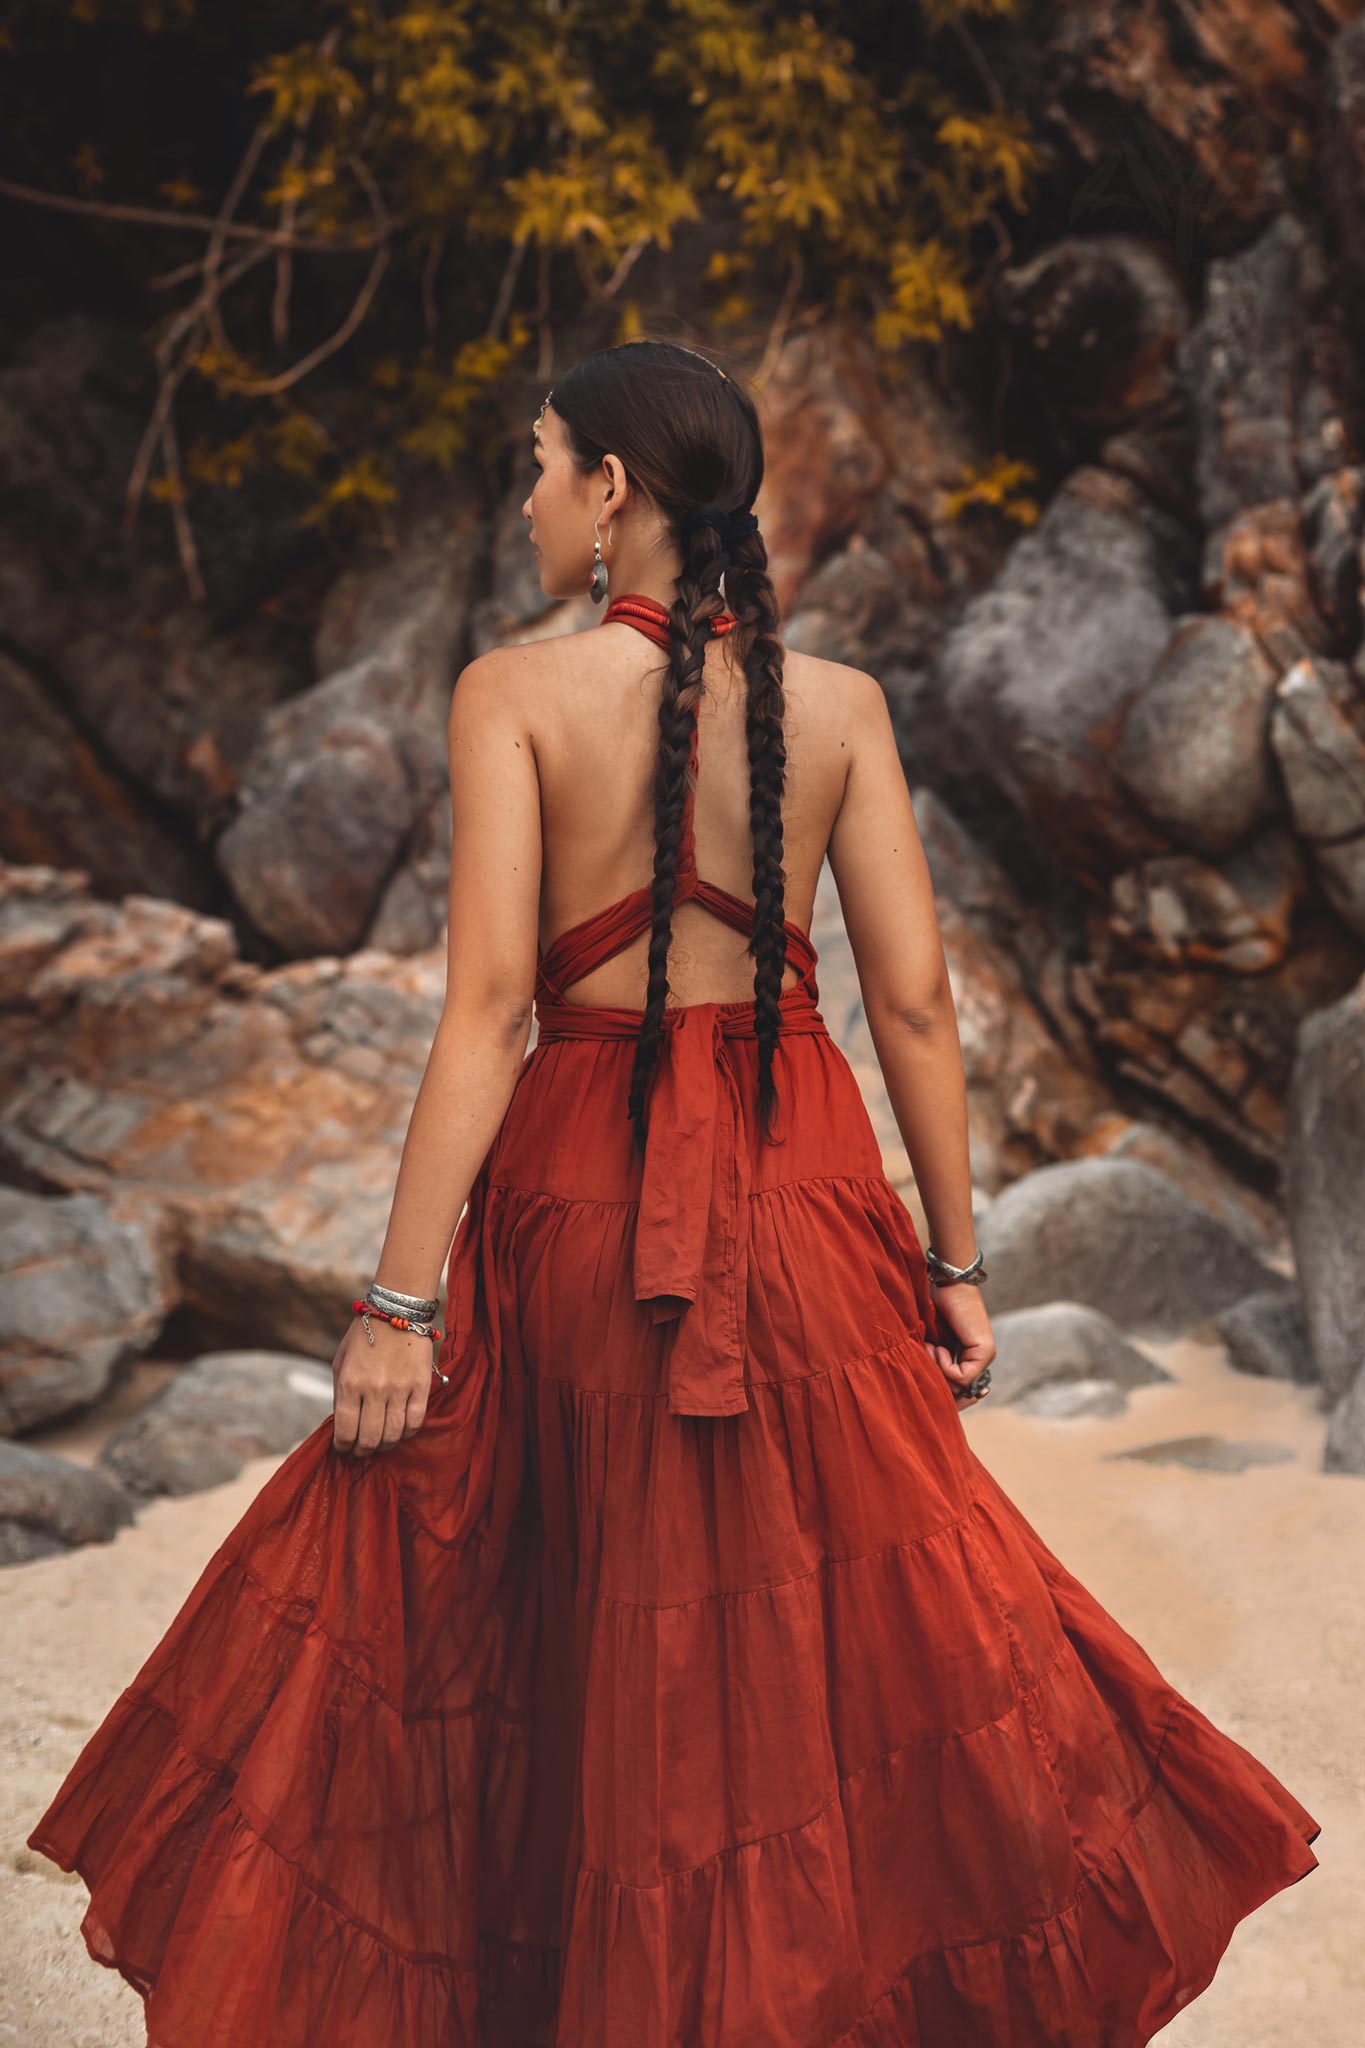 Make a statement in this one-of-a-kind red bohemian prom dress